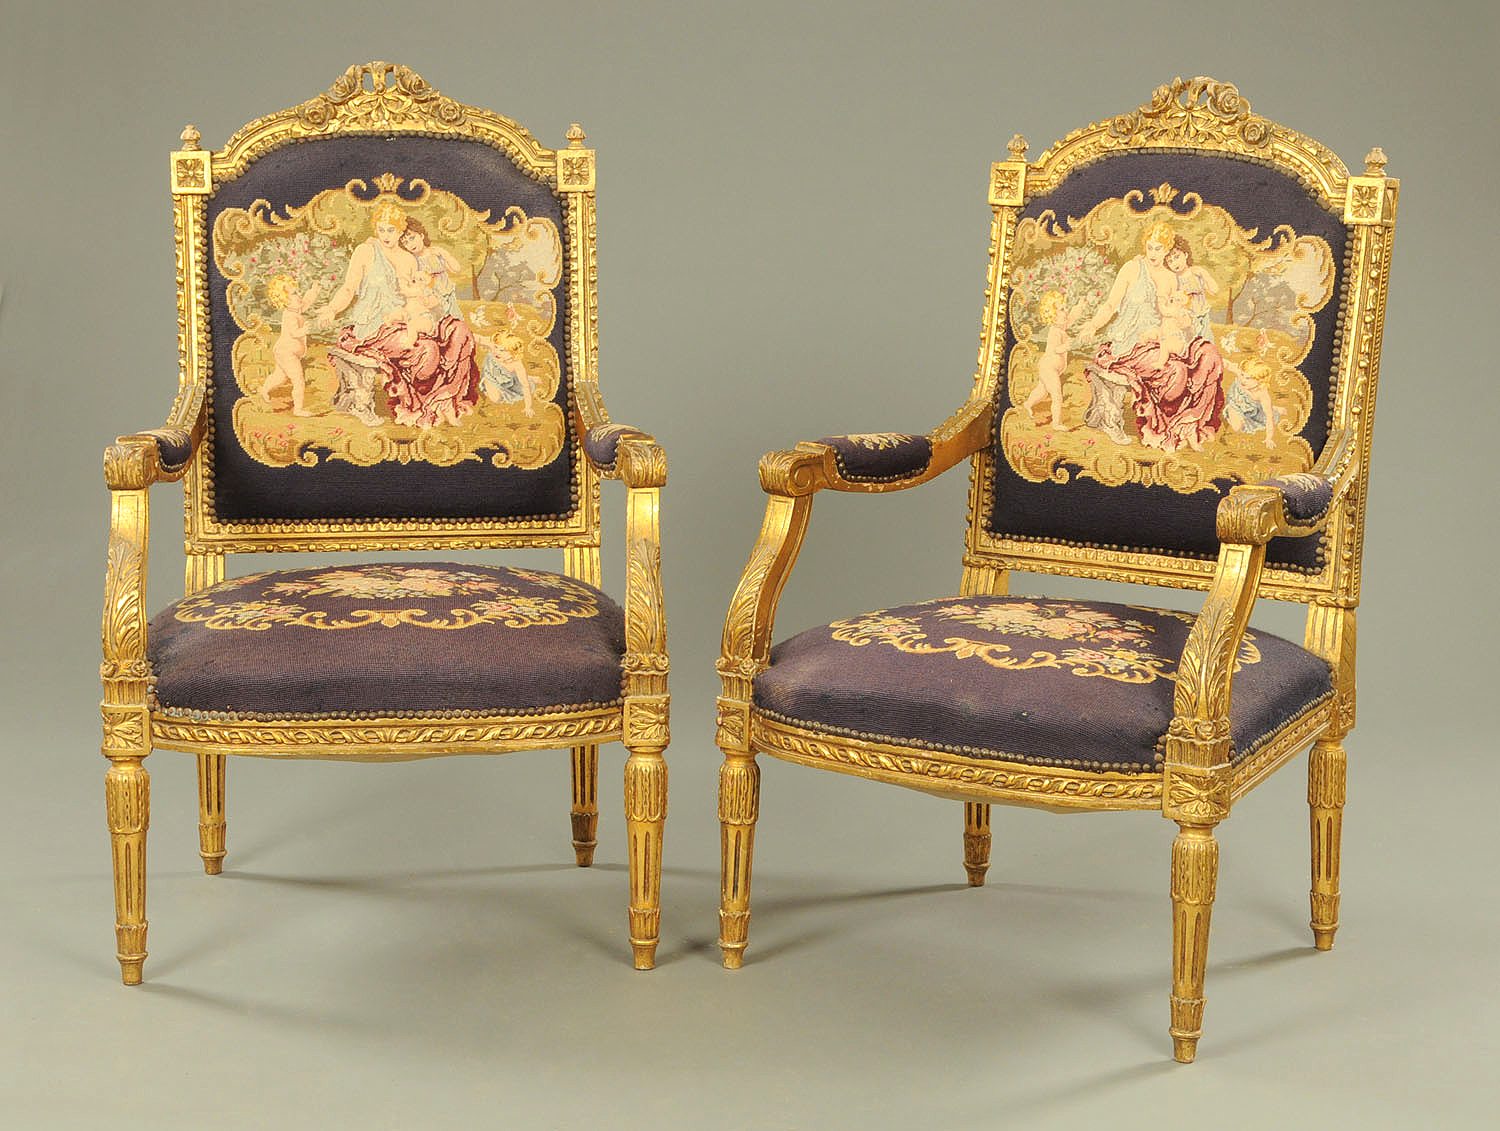 Vintage Chairs Pair of Louis XVI Style Gilt Painted Wooden Tapesry Armchairs